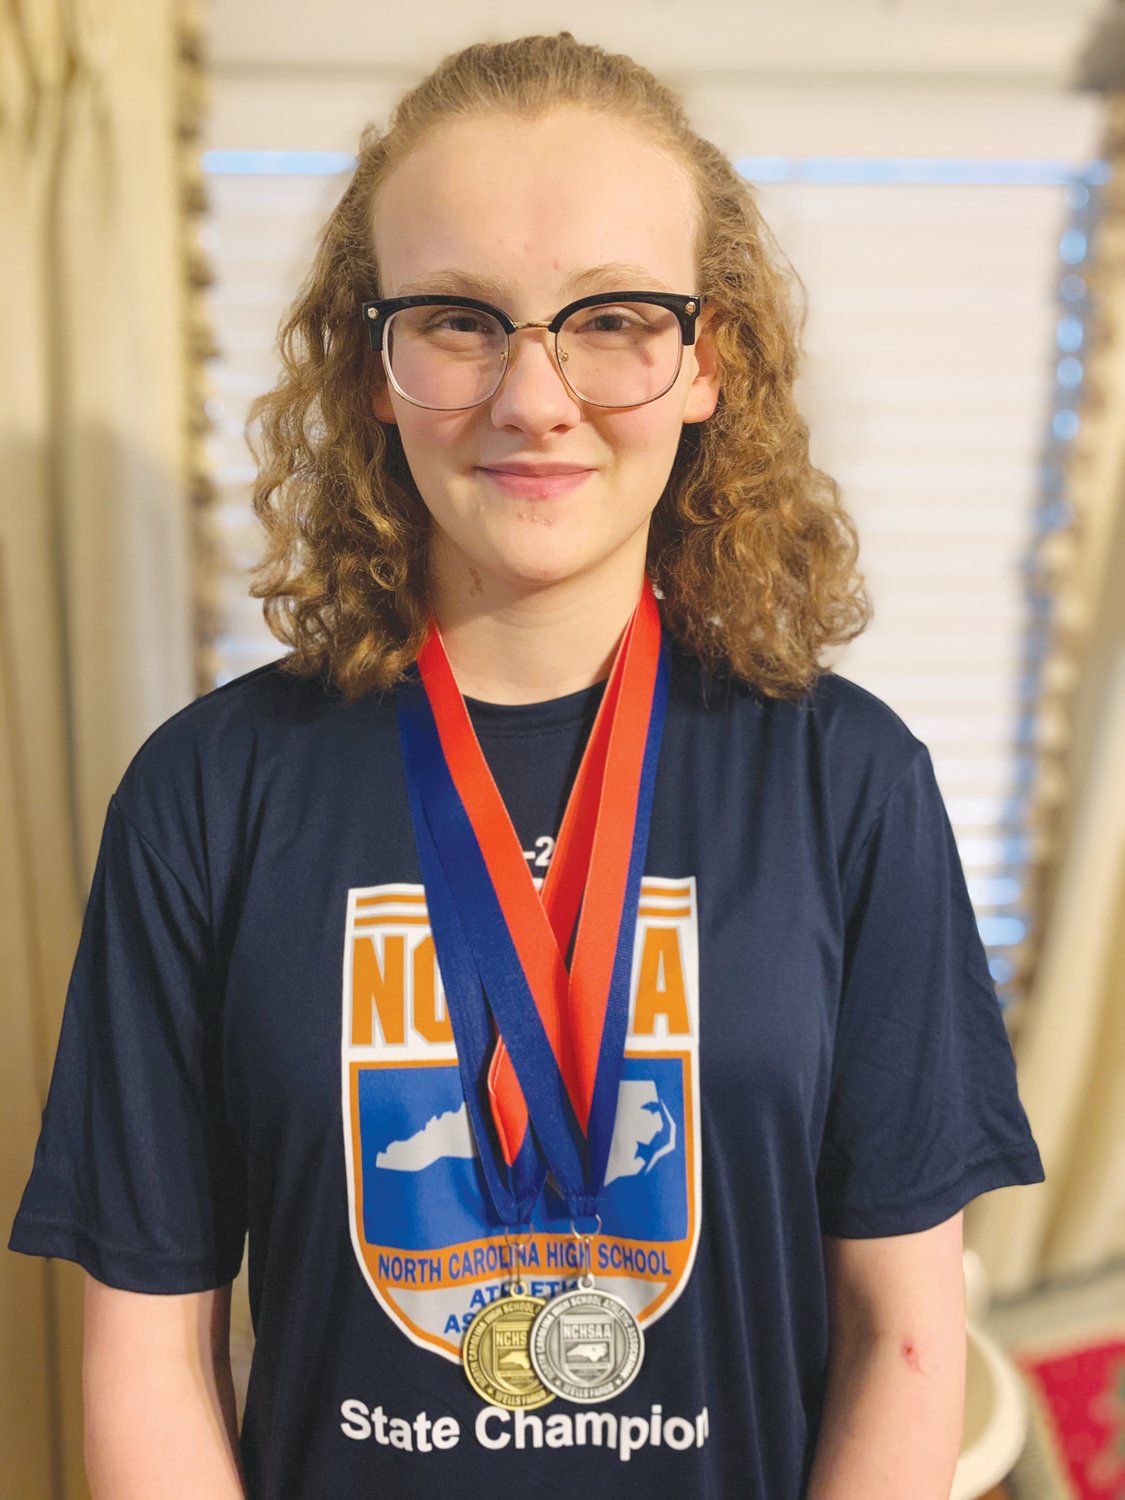 Jordan-Matthews' Jennah Fadely poses with the two medals she won at the NCHSAA 1A/2A Swimming State Championships on Friday in Cary. Fadely would take the state title with a record-setting time of 1:02.11 in the women's 100 breaststroke.